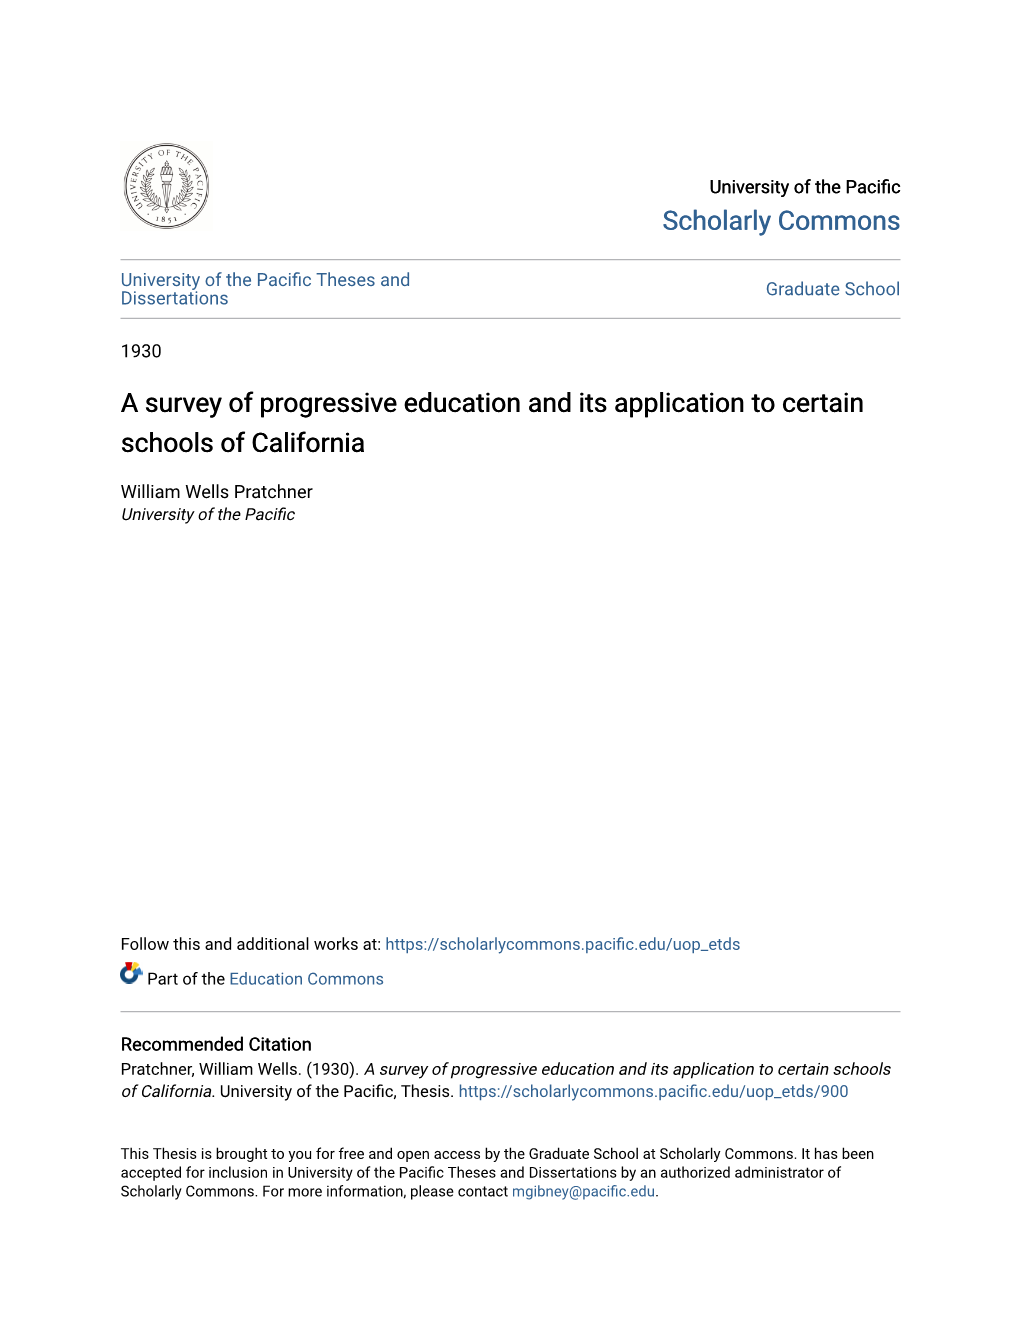 A Survey of Progressive Education and Its Application to Certain Schools of California